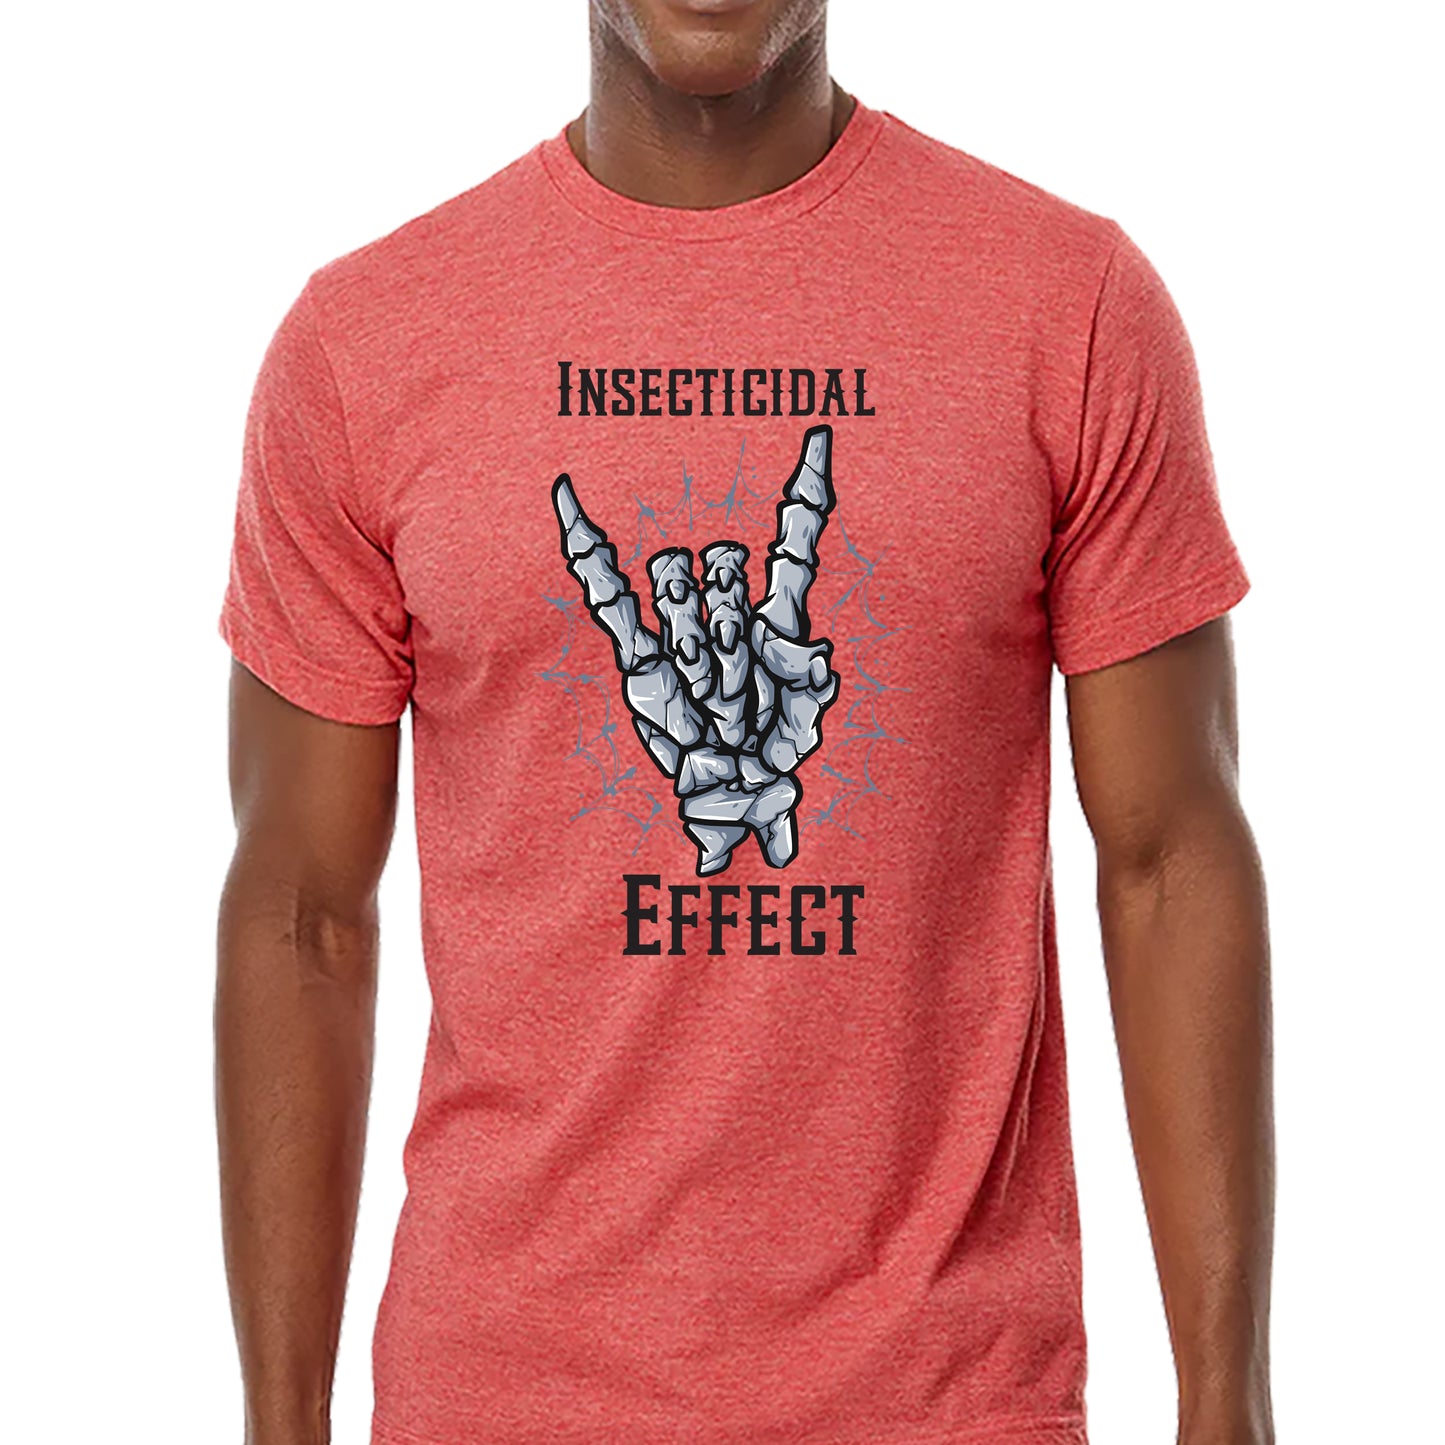 Sipderman Insecticidal Effect T-shirt